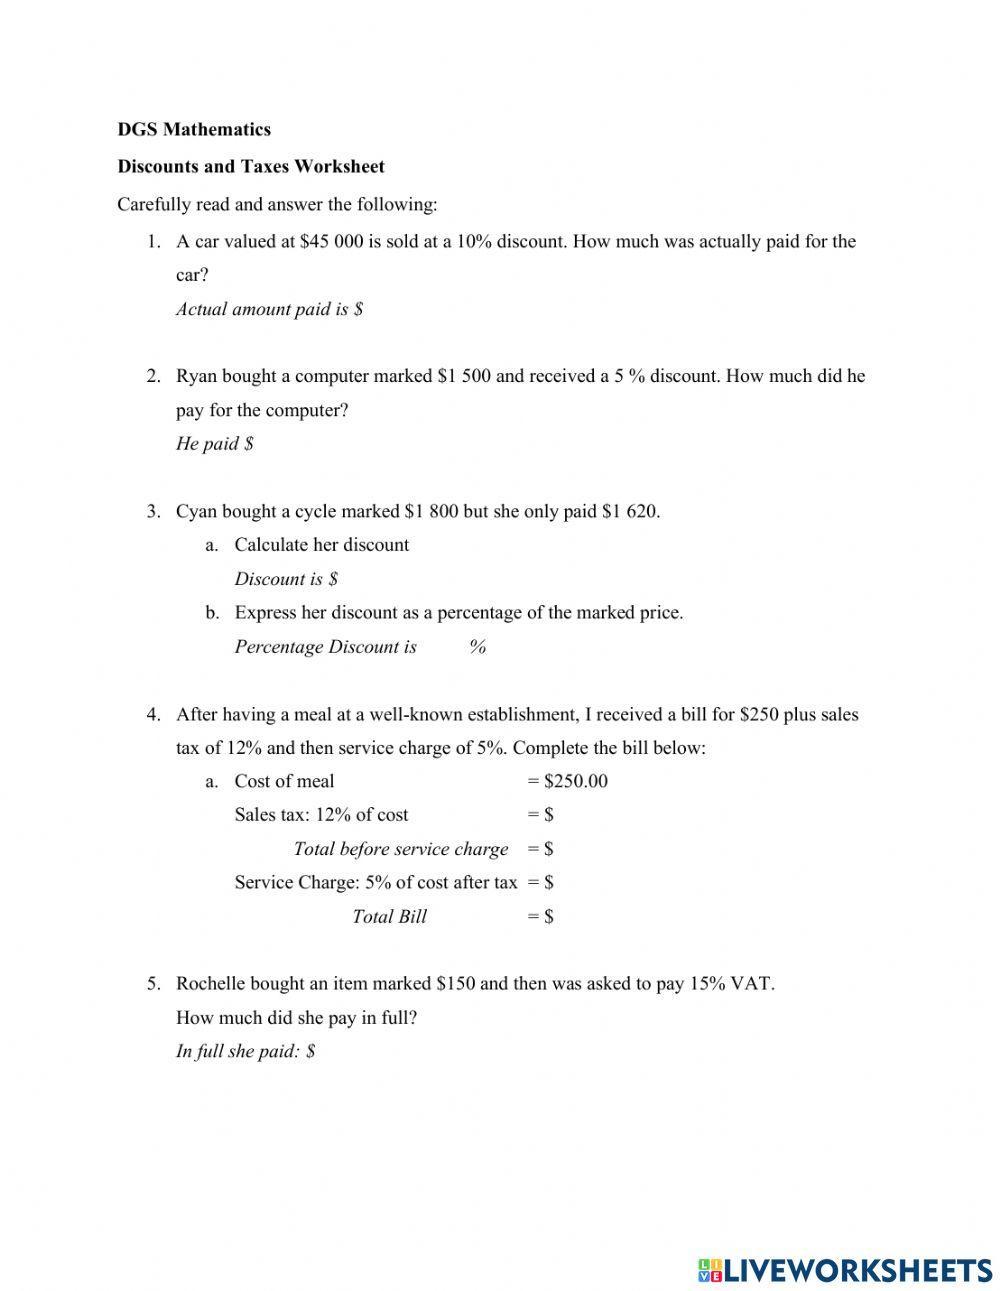 Discounts and Taxes Worksheet